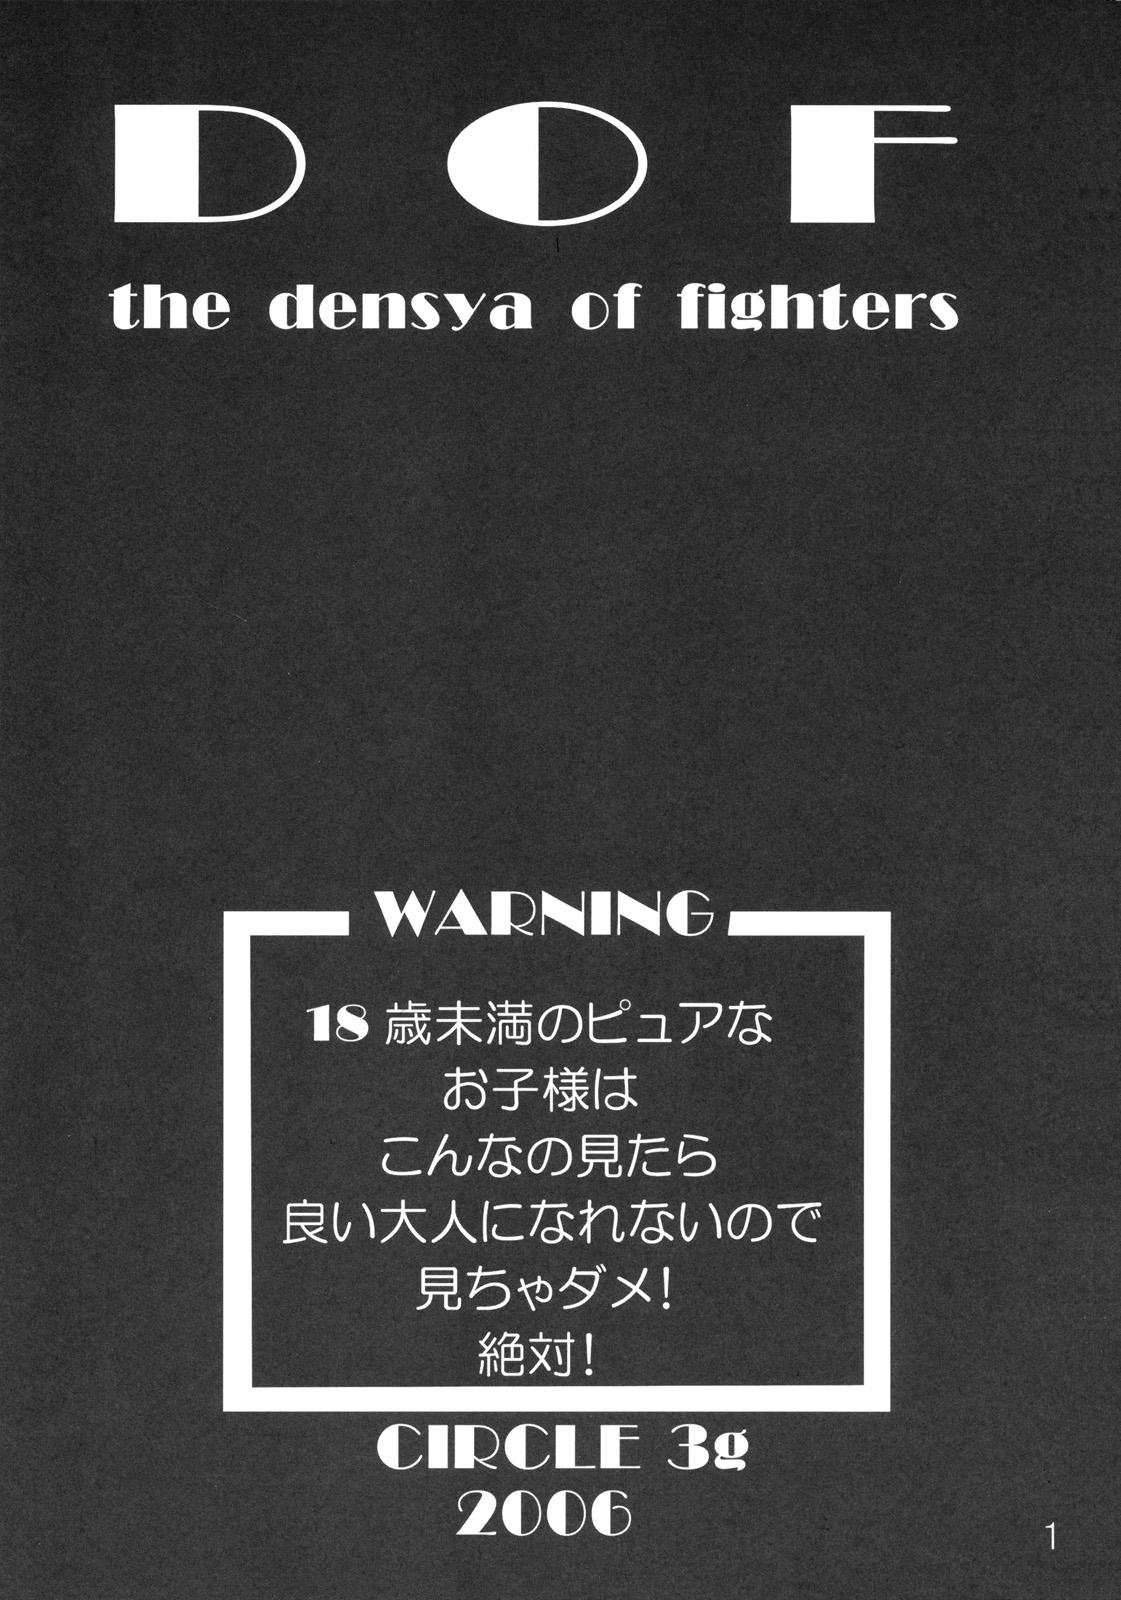 Boquete DOF the densya of fighters - King of fighters Fatal fury Blow Job - Page 2